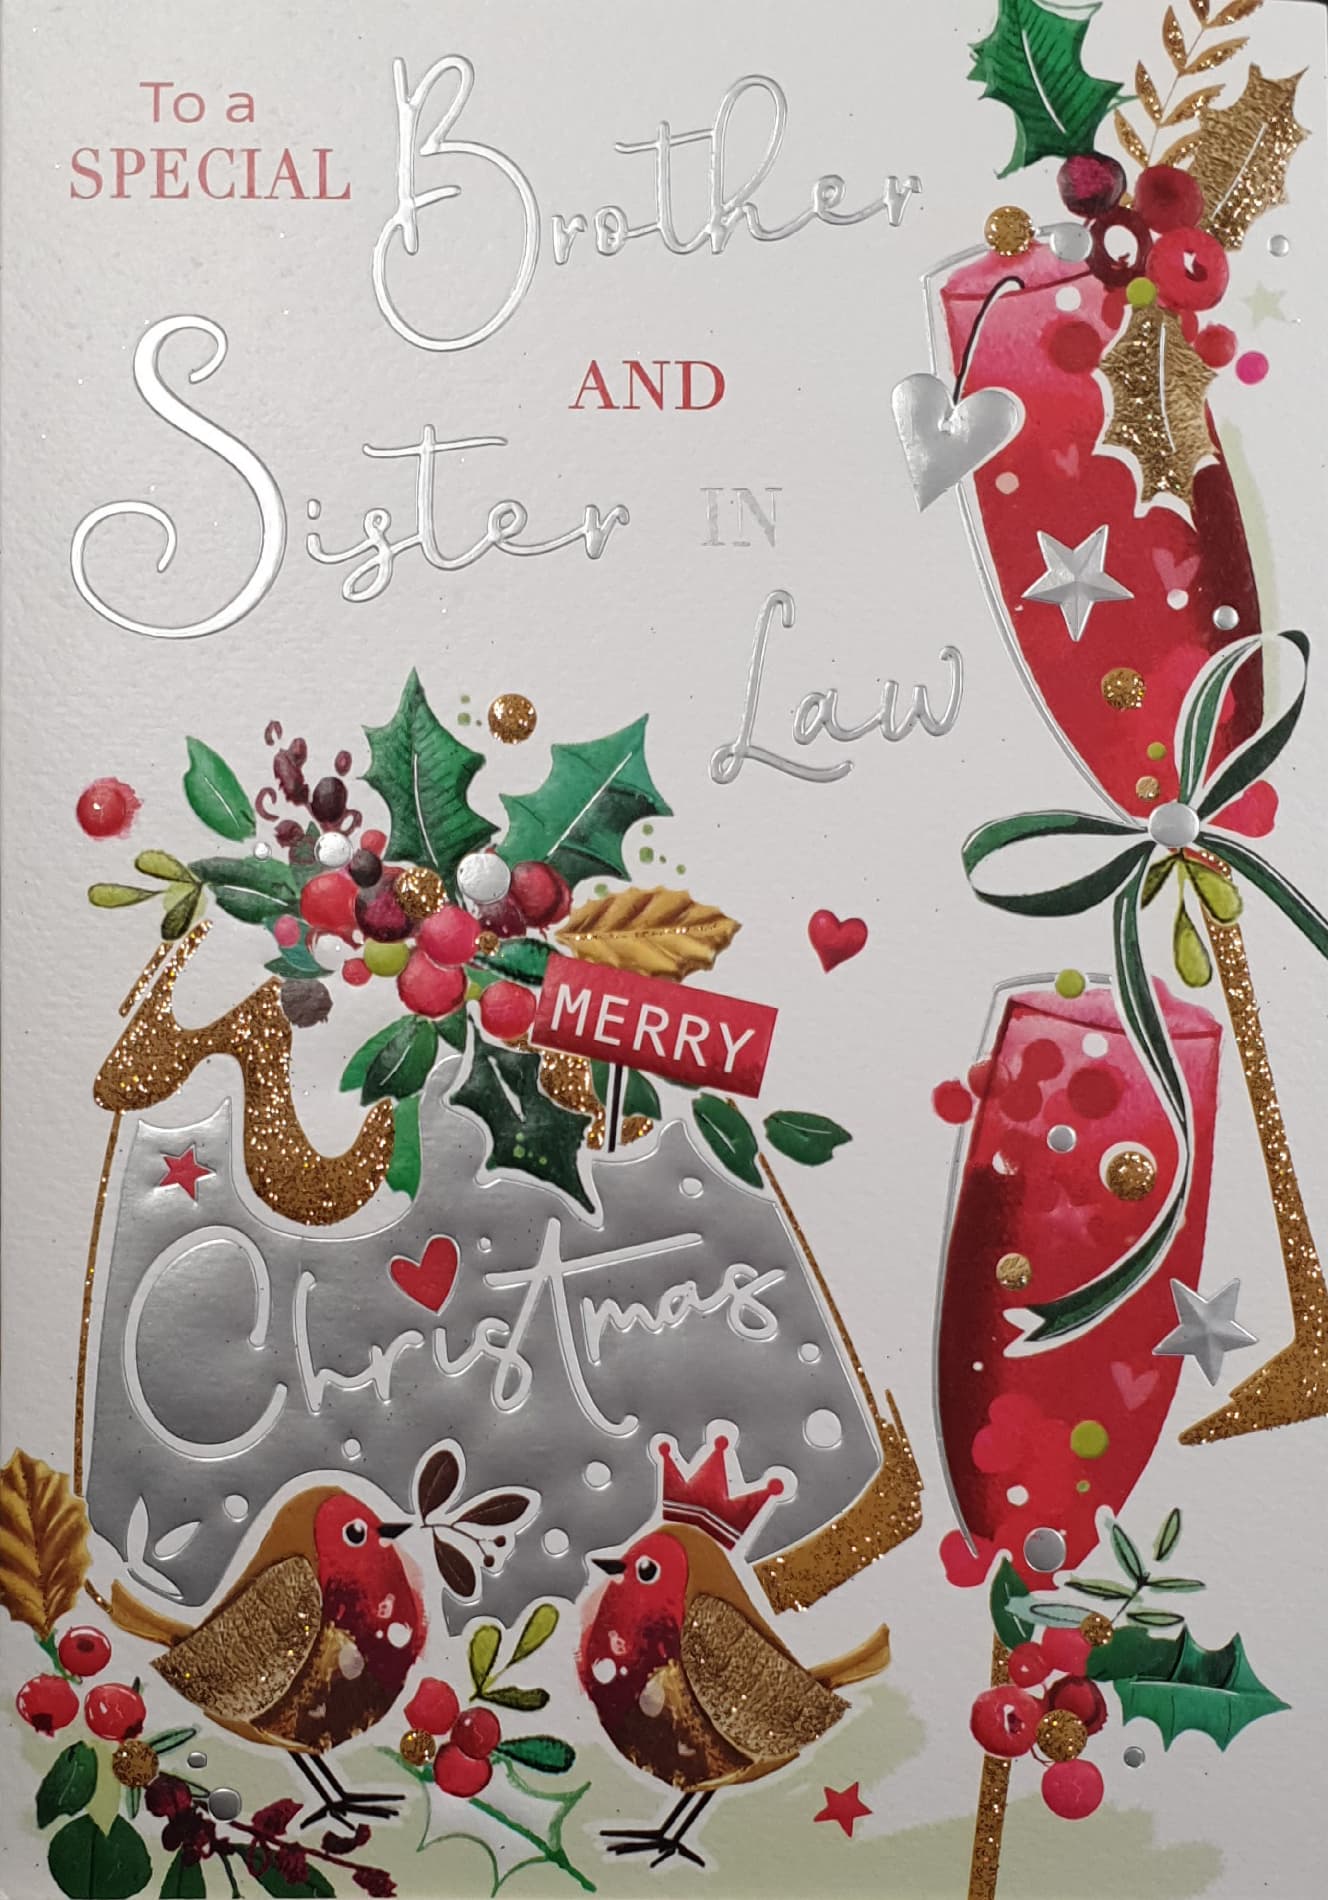 Brother & Sister in Law Christmas Card - Silver & Gold Christmas Pudding & Champagne